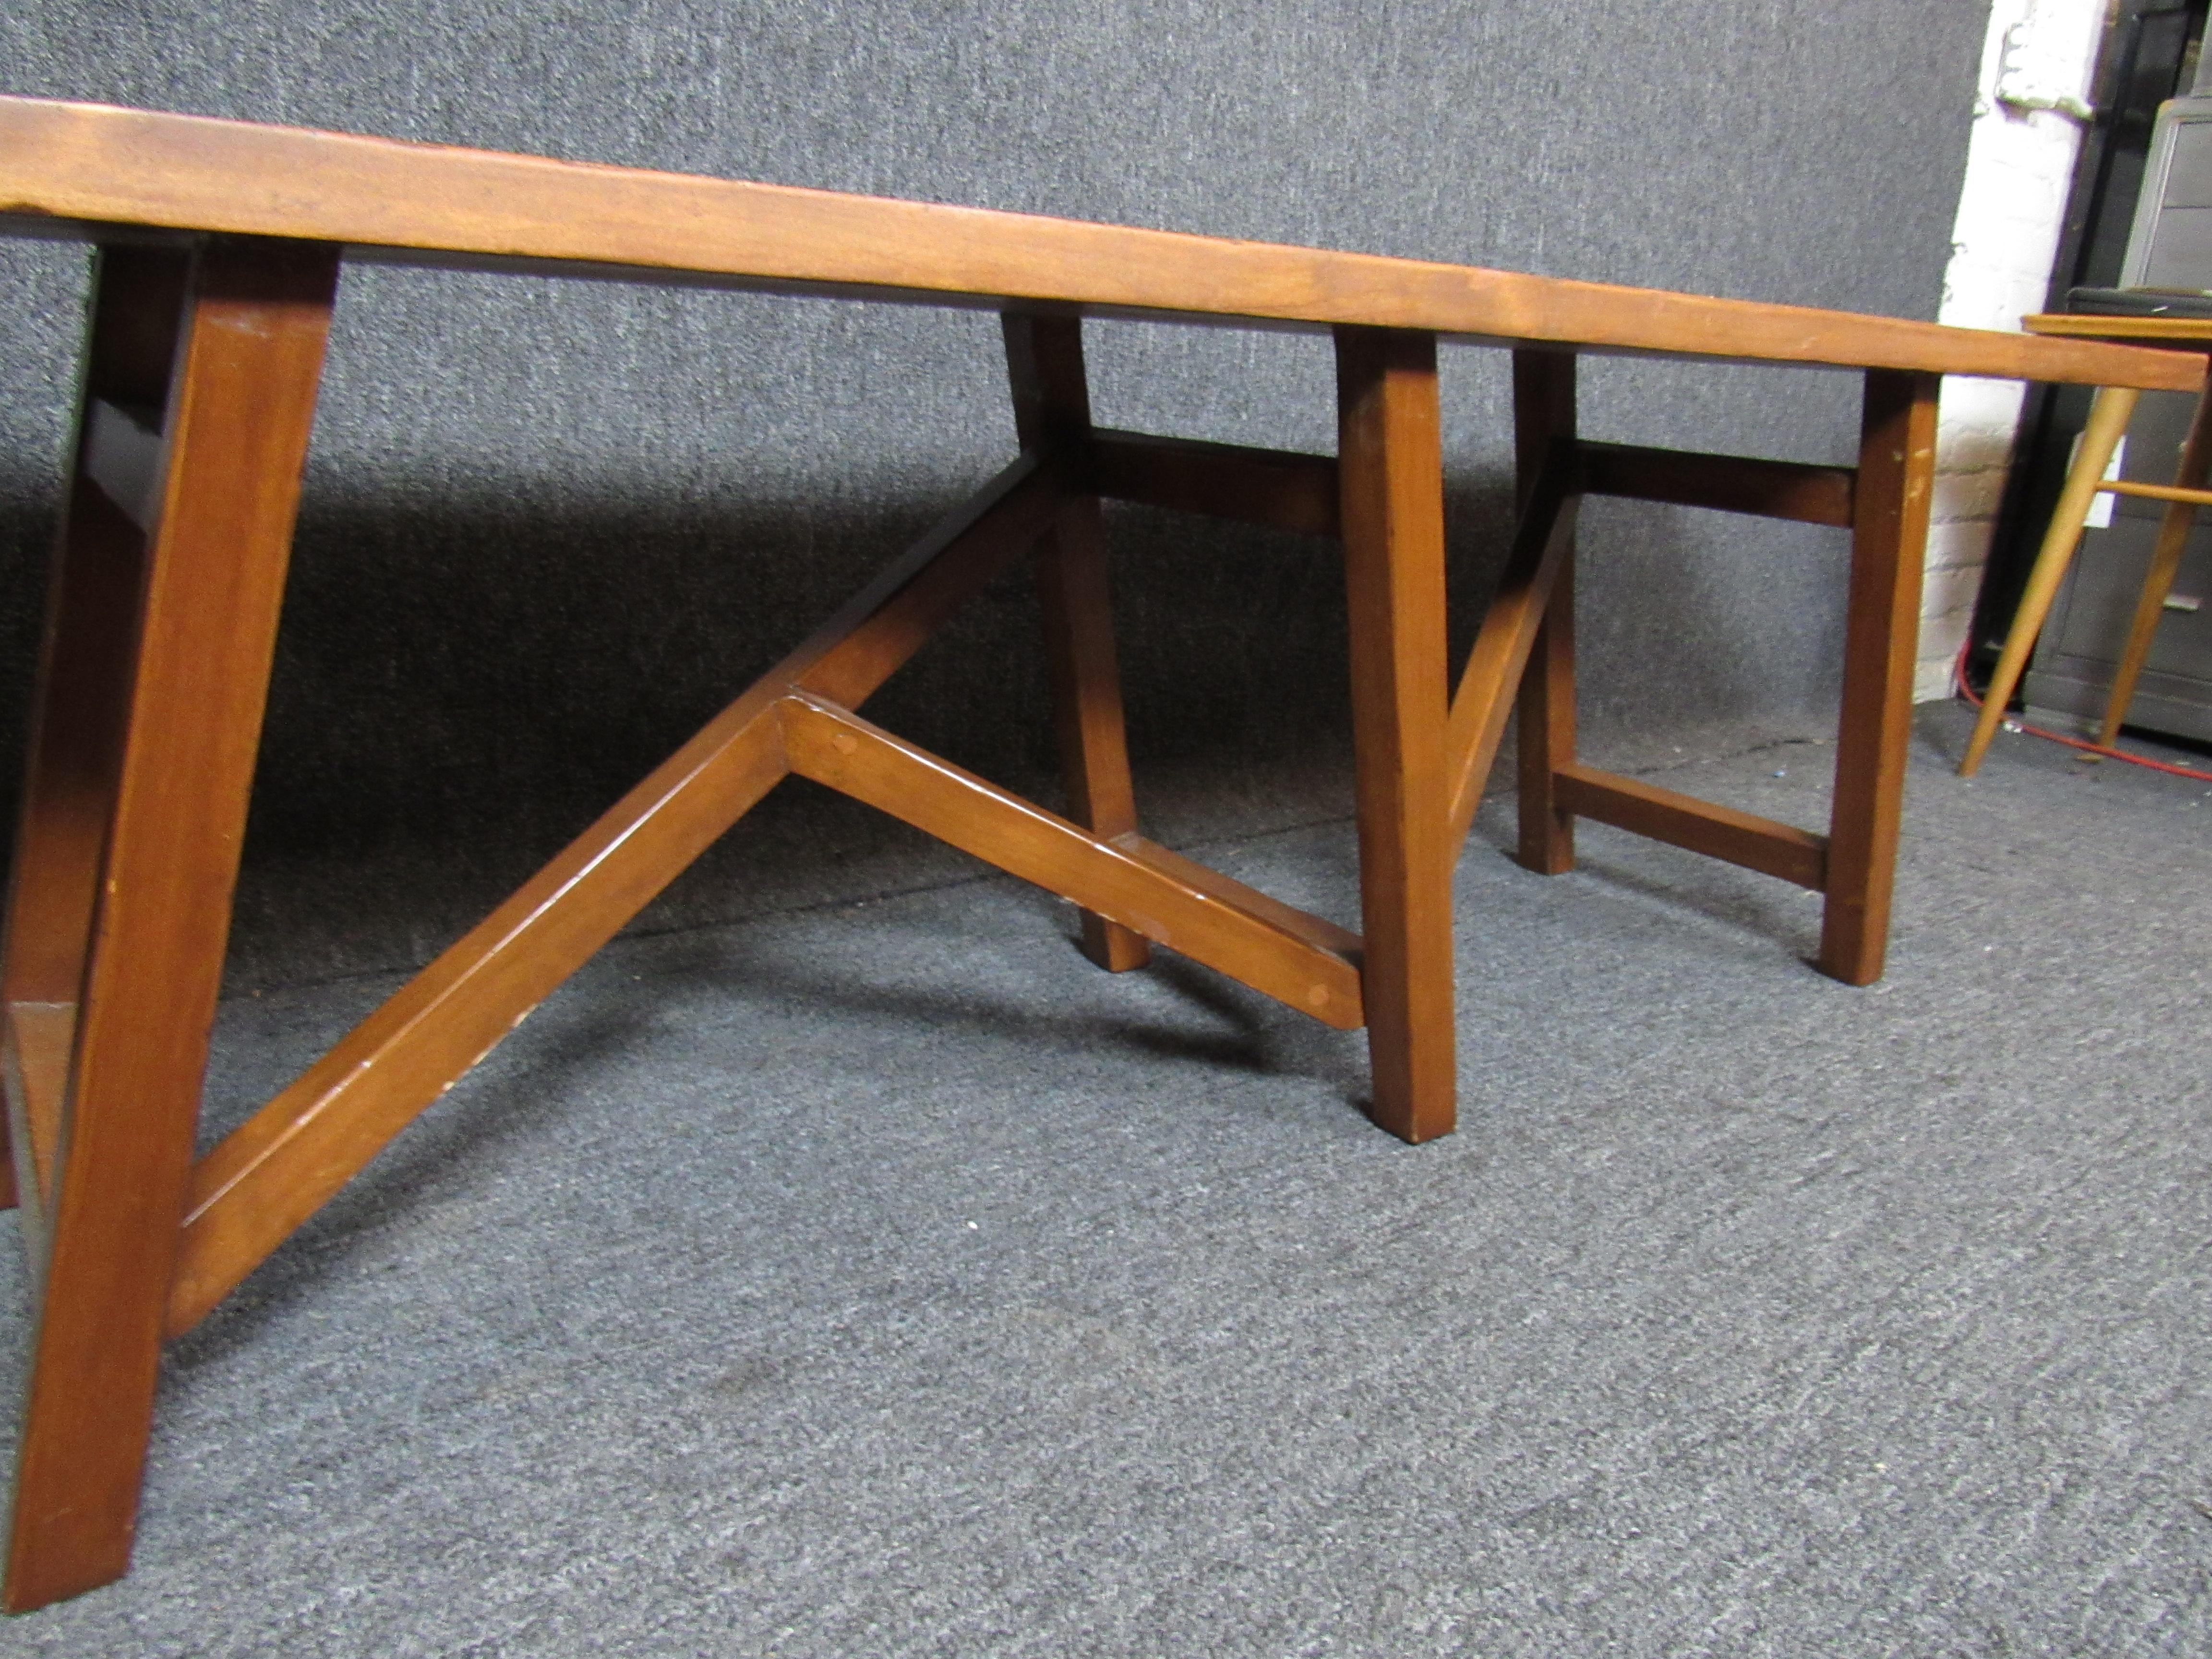 Terrifically wonderful mid-century bench with a unique asymmetrical leg design. Large top shows off a nice, warm grain as well as joint details. Extremely versatile piece perfect for the home or office, as a seat or table. 

(Please confirm item